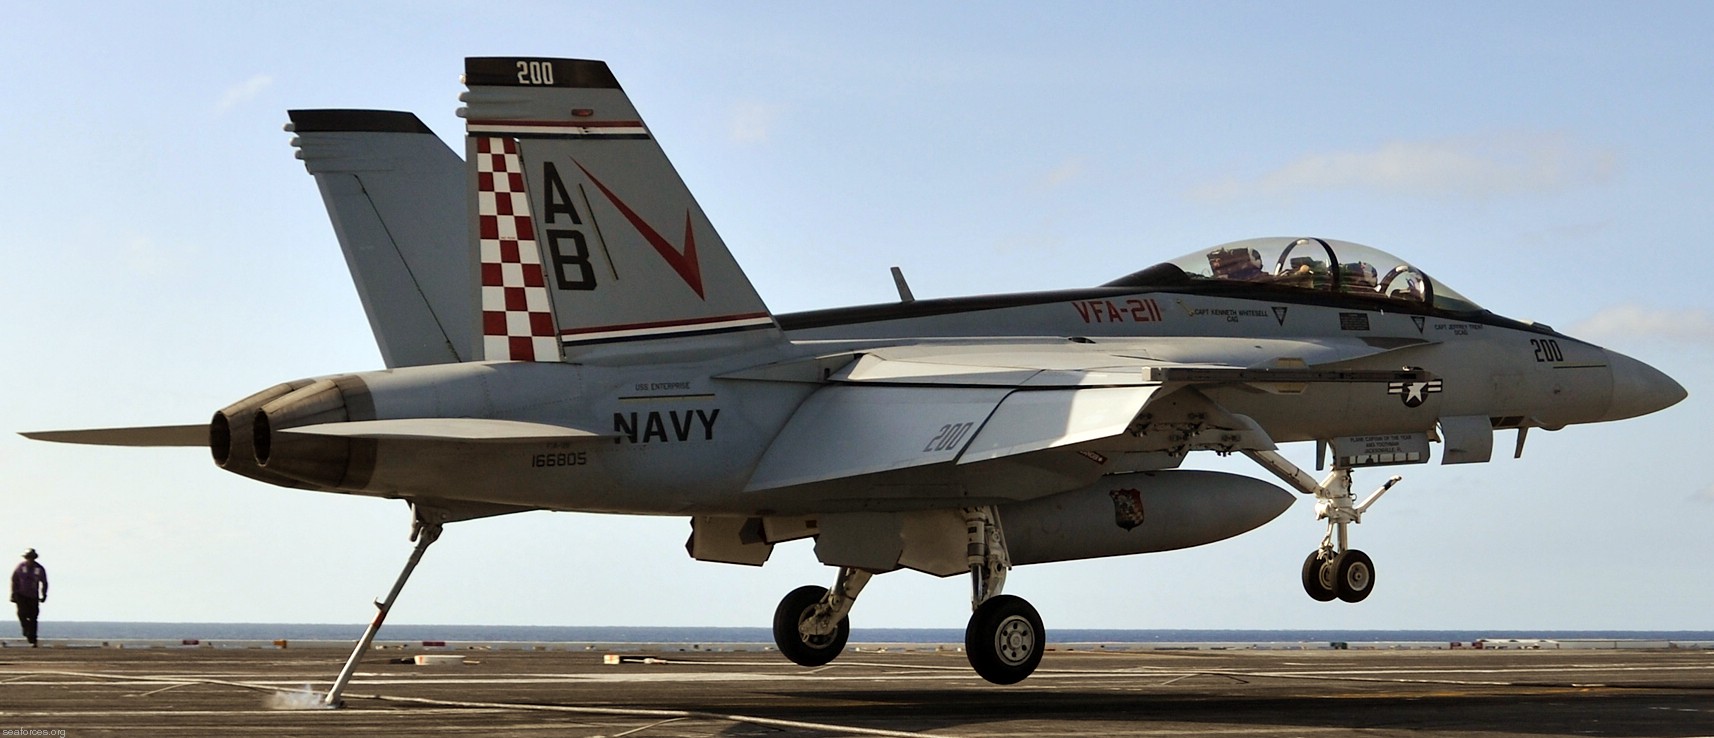 vfa-211 fighting checkmates strike fighter squadron f/a-18f super hornet navy carrier air wing cvw-1 uss enterprise cvn-65 70 special painting color